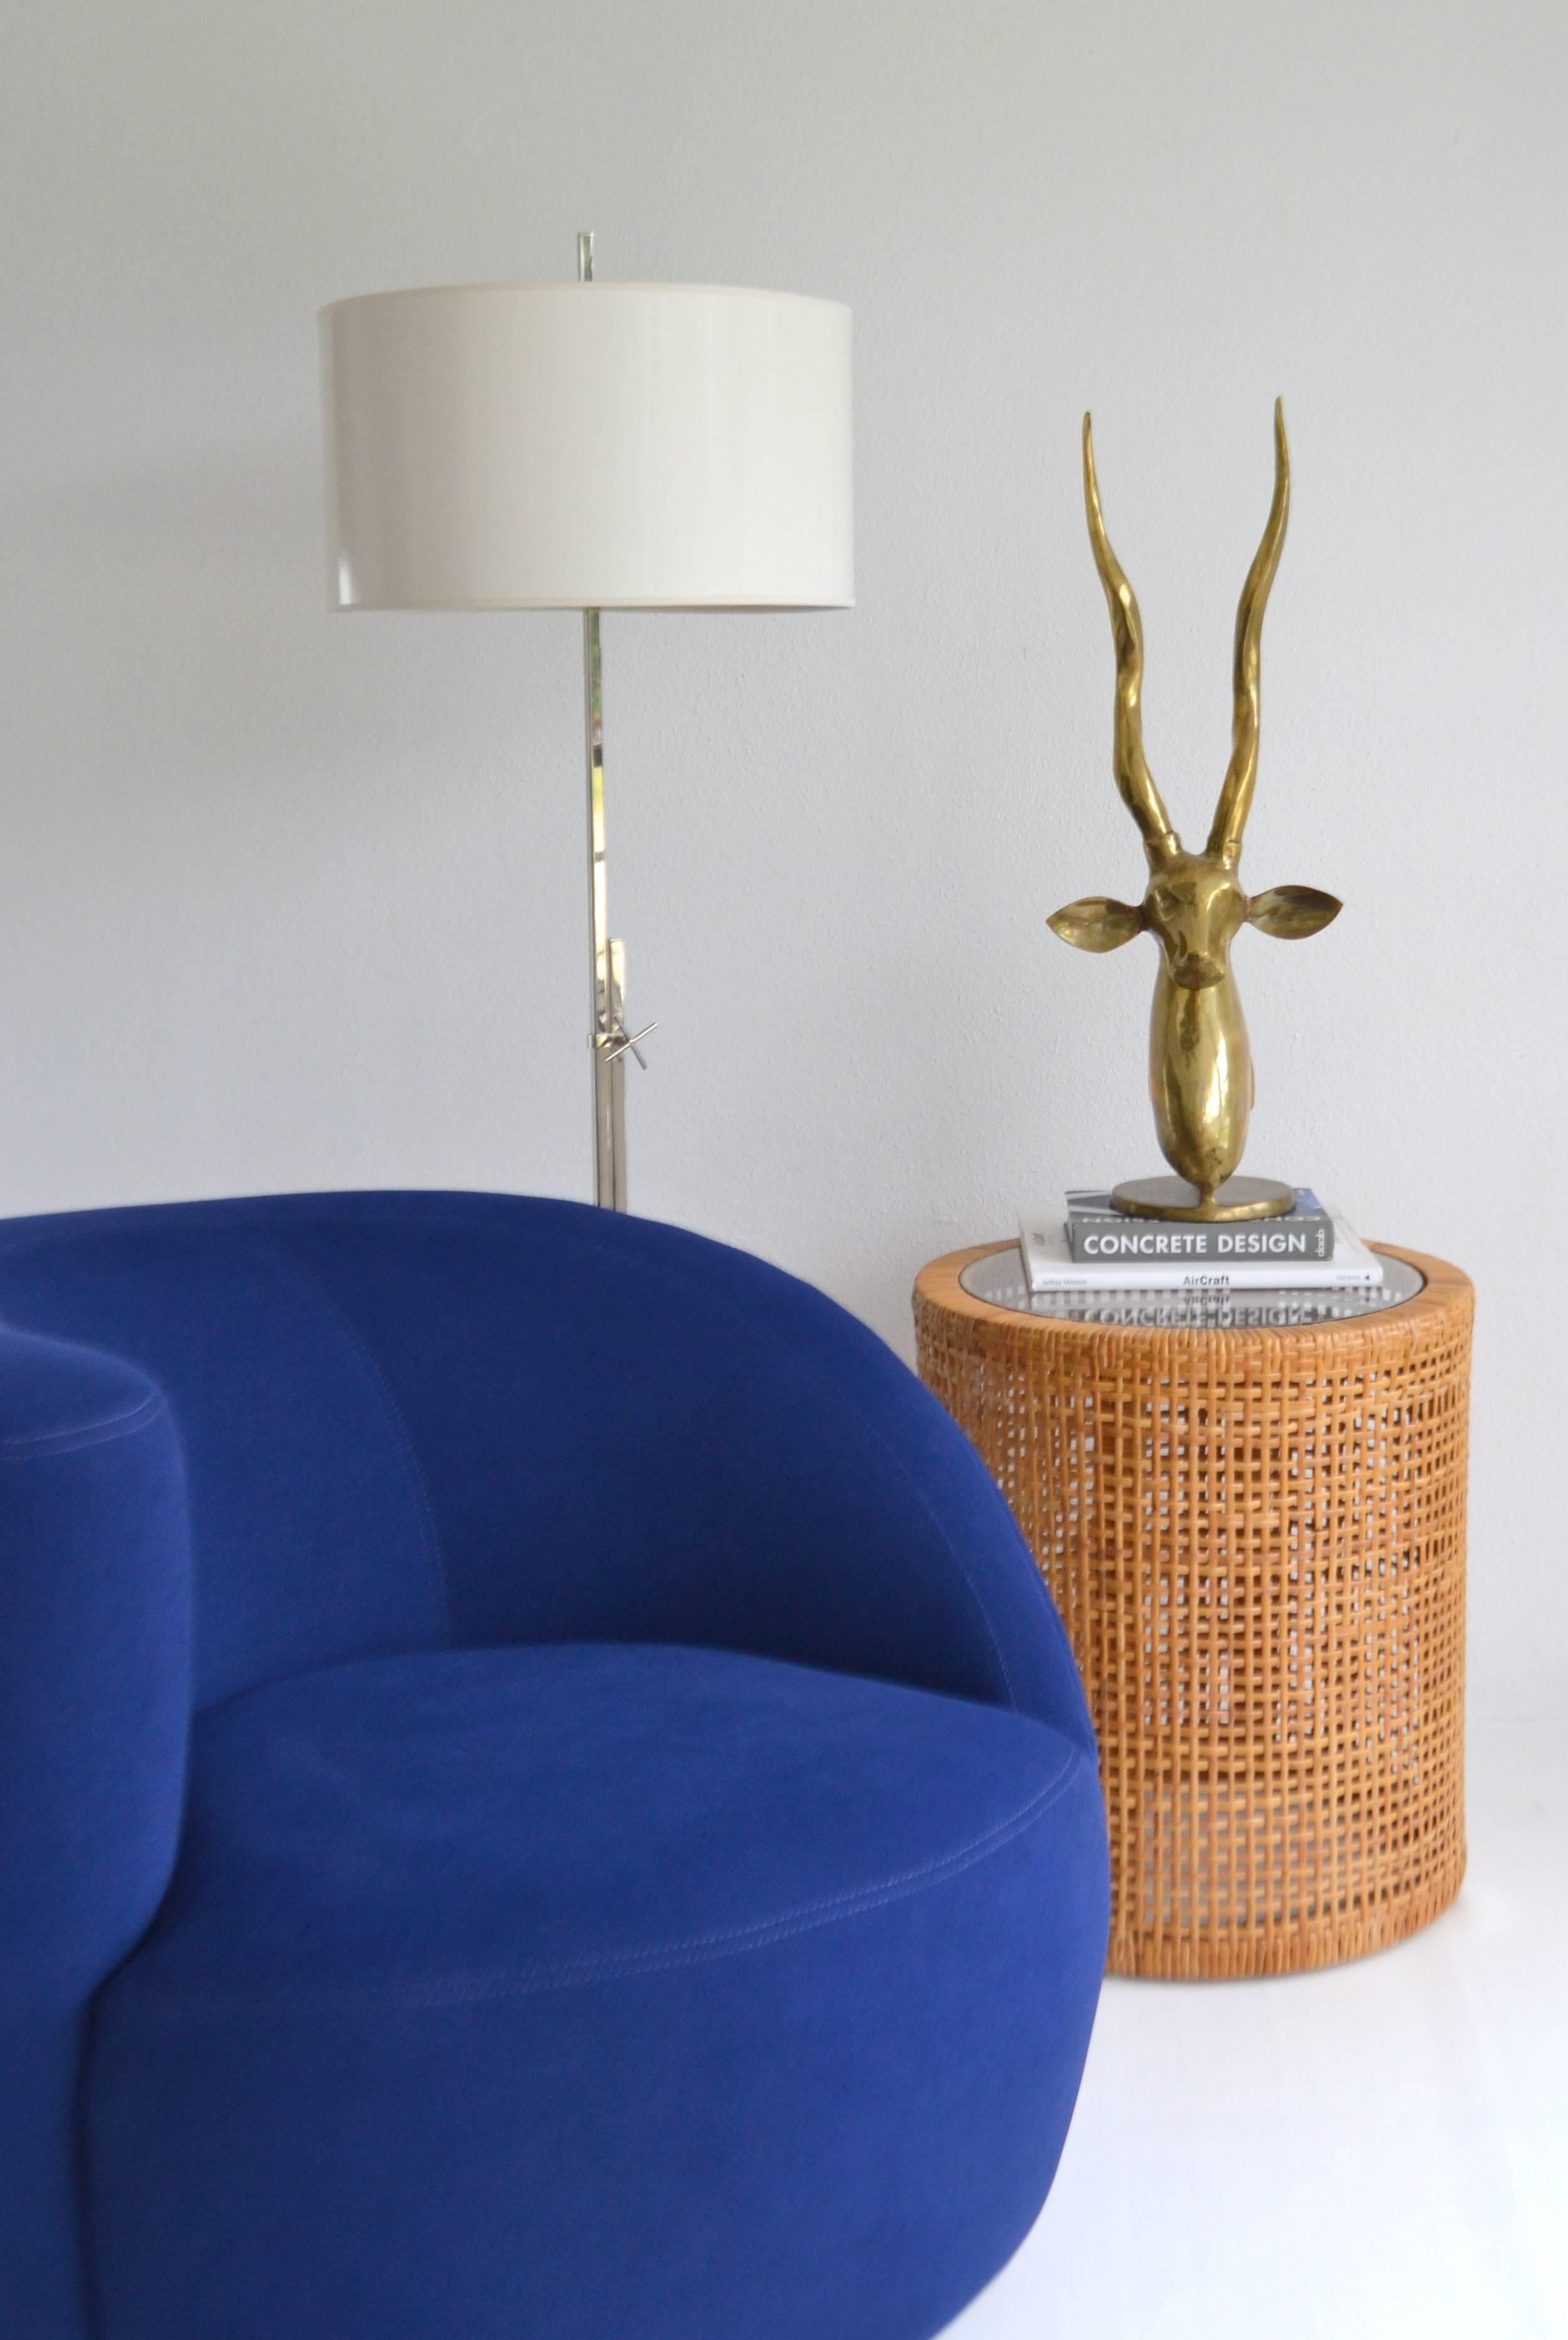 Striking Mid-Century woven cane drum form side table, circa 1960s -1970s. This sculptural open weave end table / occasional table is finished with an inset glass top. 